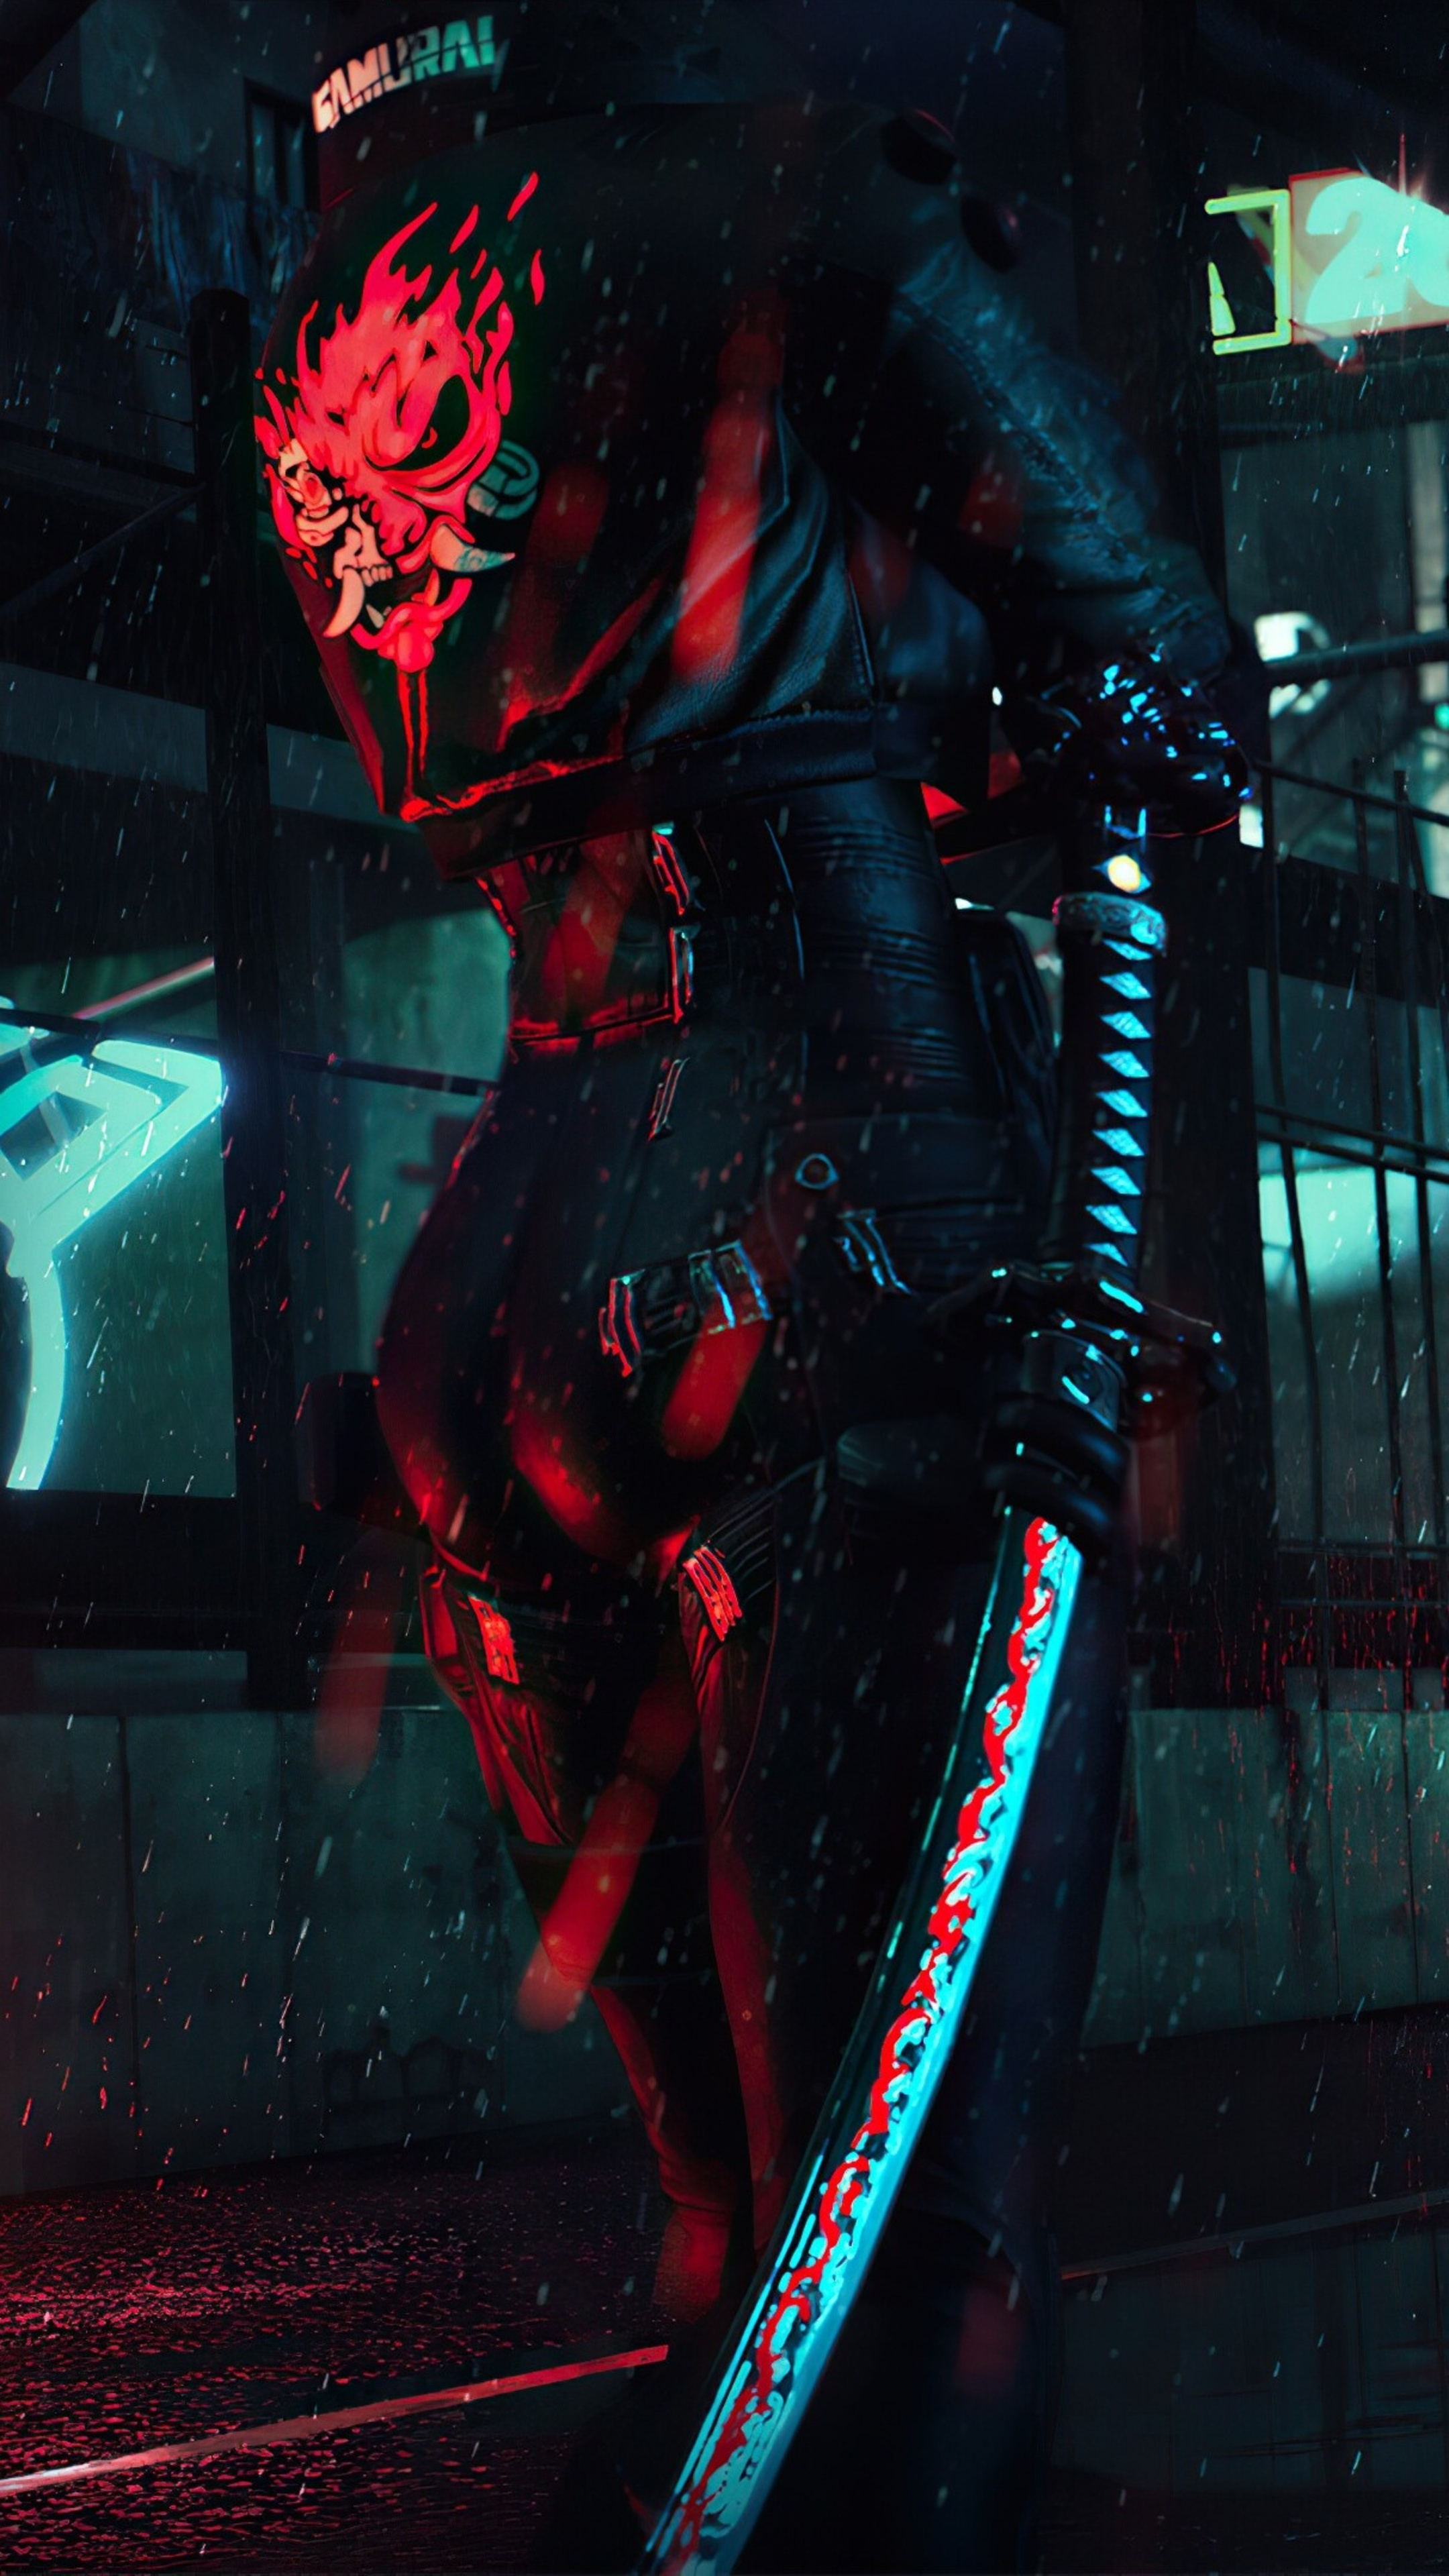 2160x3840 Samurai Sword Girl Cyberpunk 2077 Sony Xperia X,XZ,Z5 Premium HD 4k Wallpapers, Images, Backgrounds, Photos and Pictures